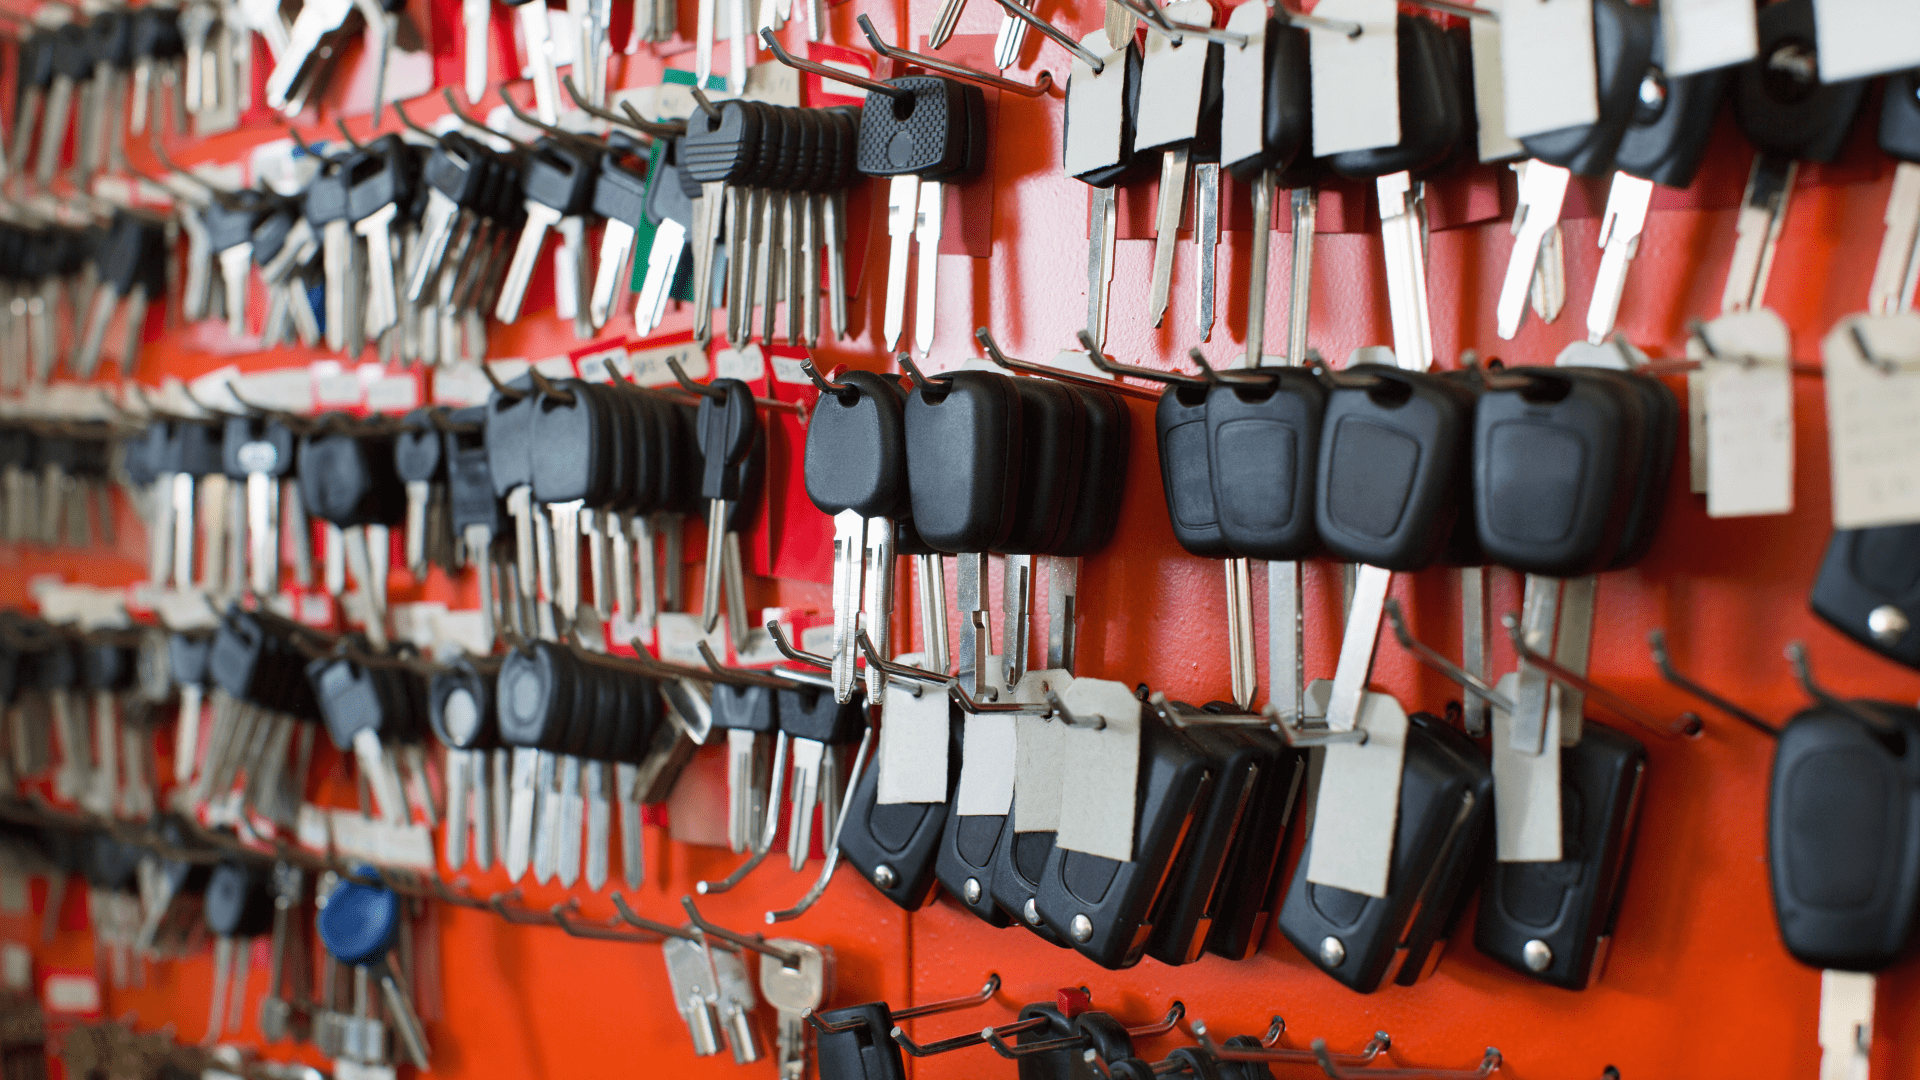 Many Types of Car Keys on a Red Wall